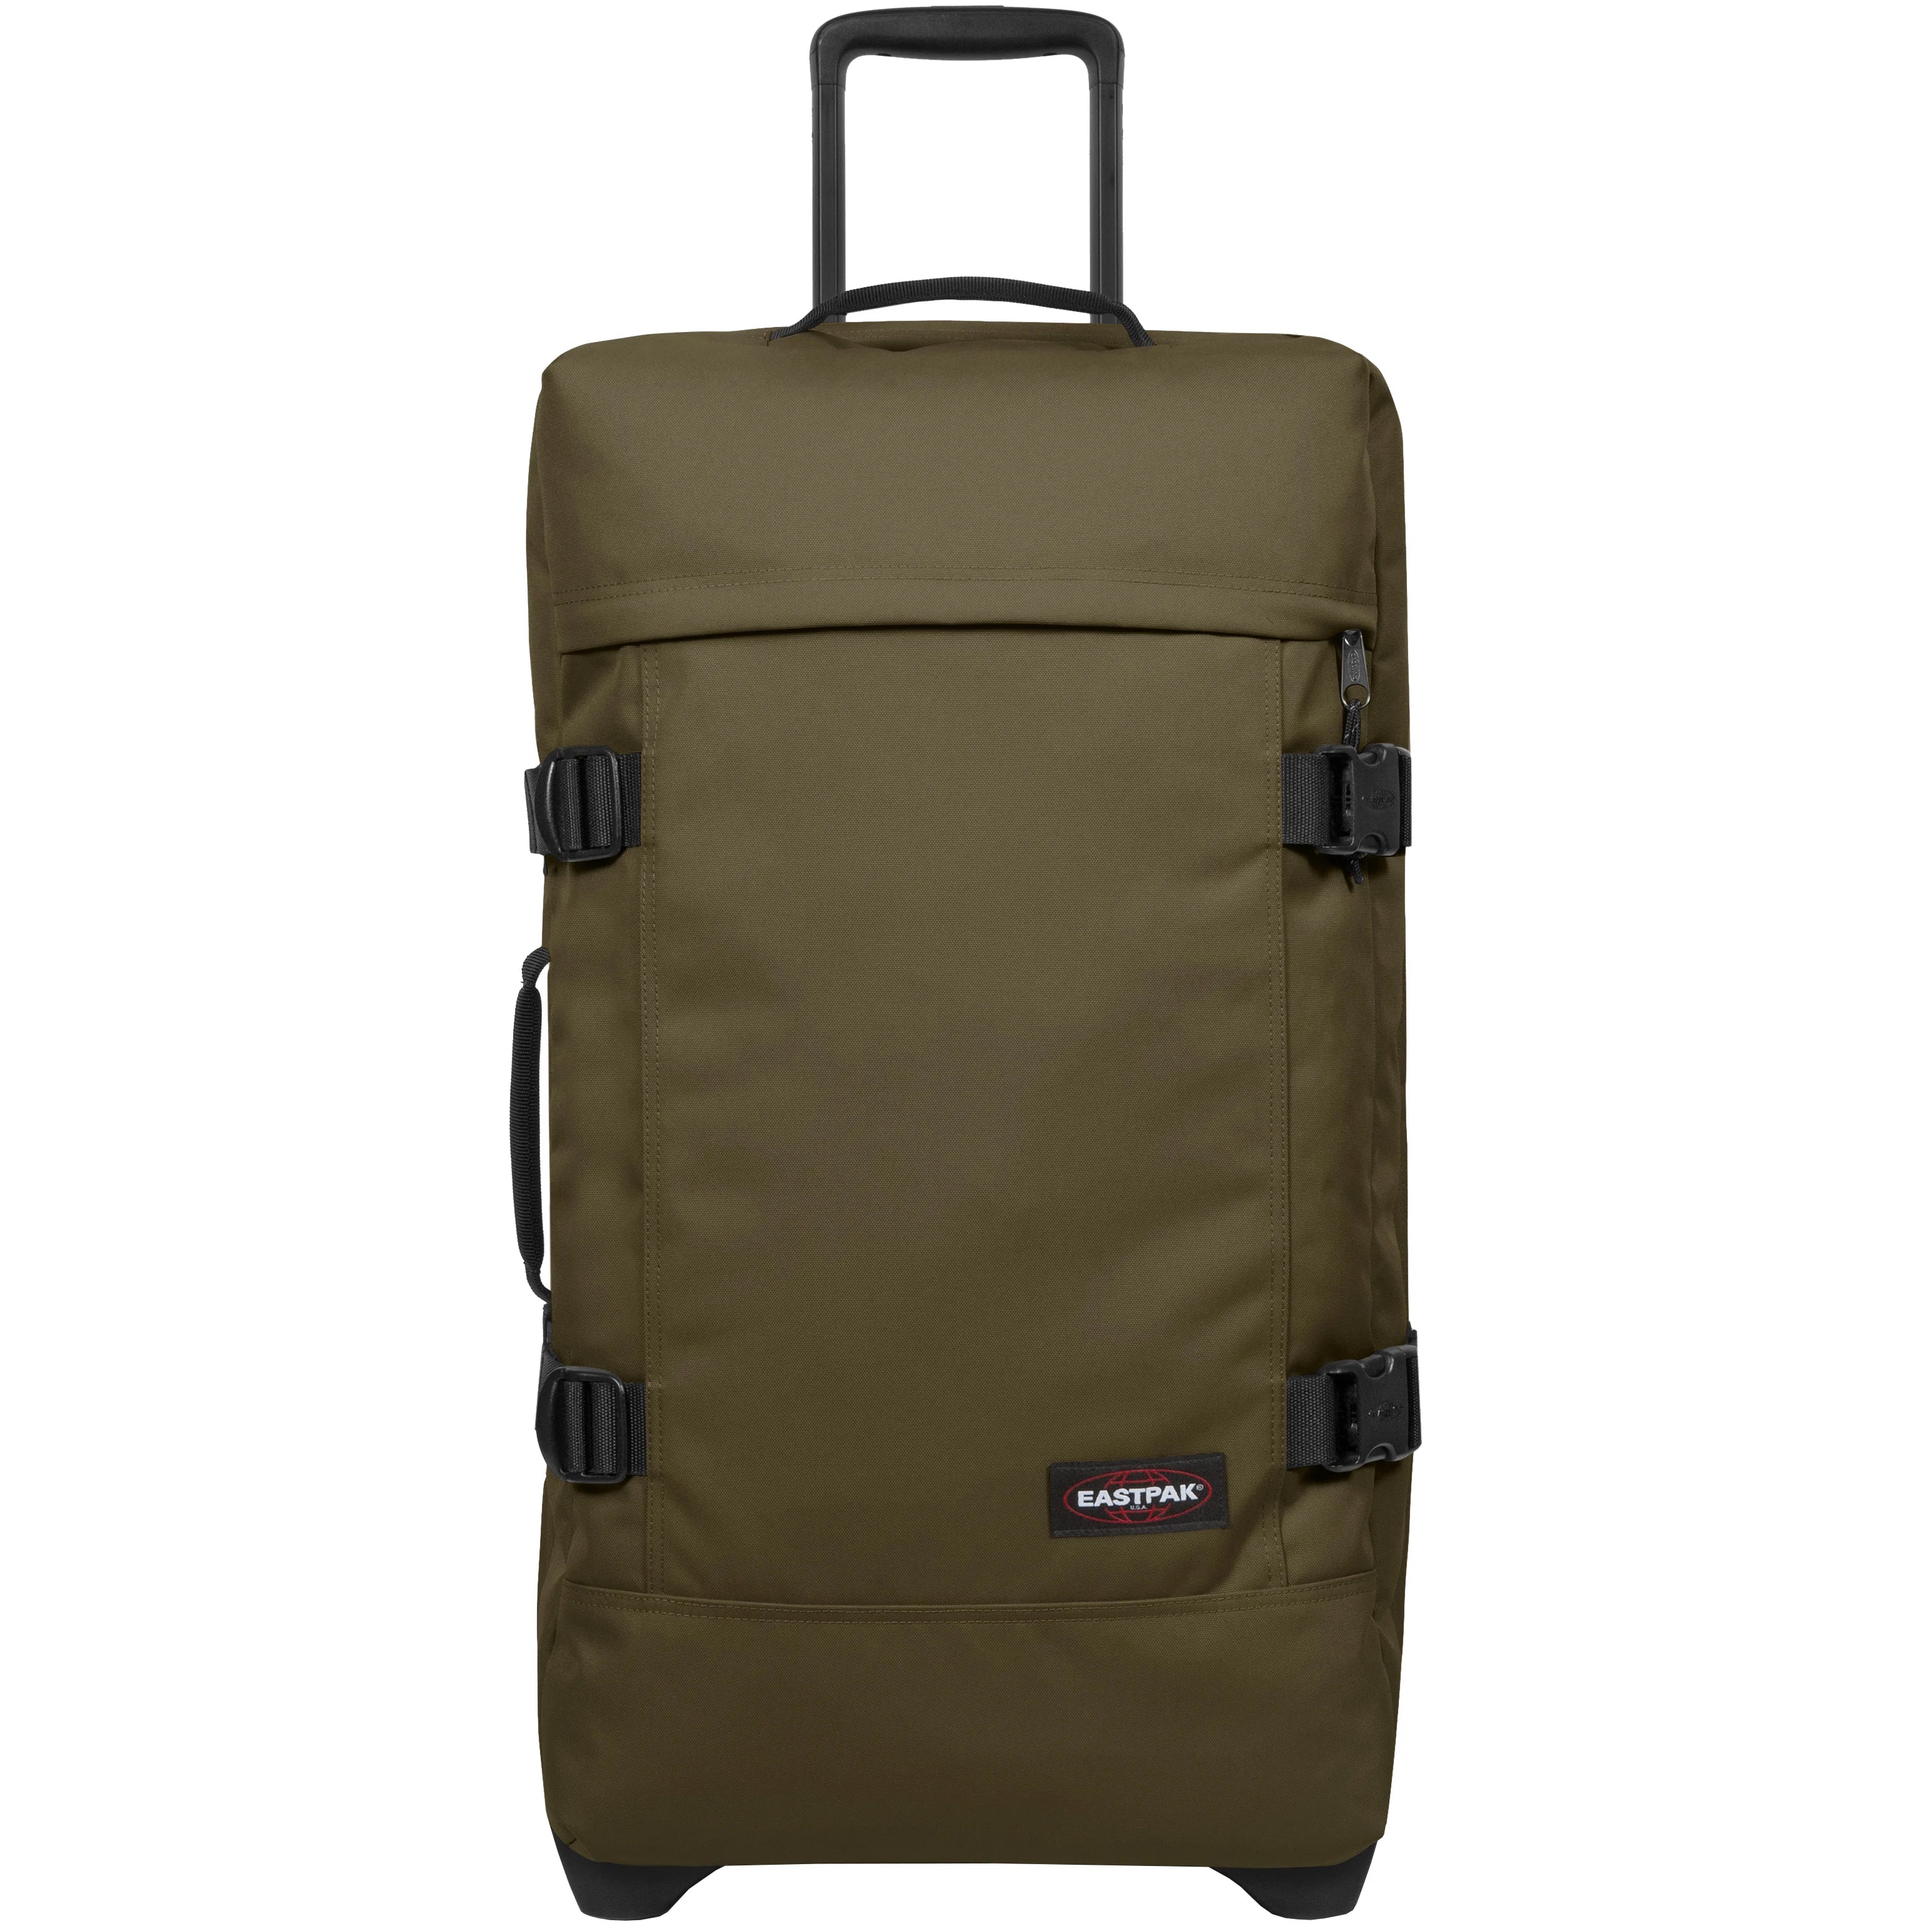 Eastpak Authentic Travel Tranverz 2-wheel trolley 67 cm - Army Olive